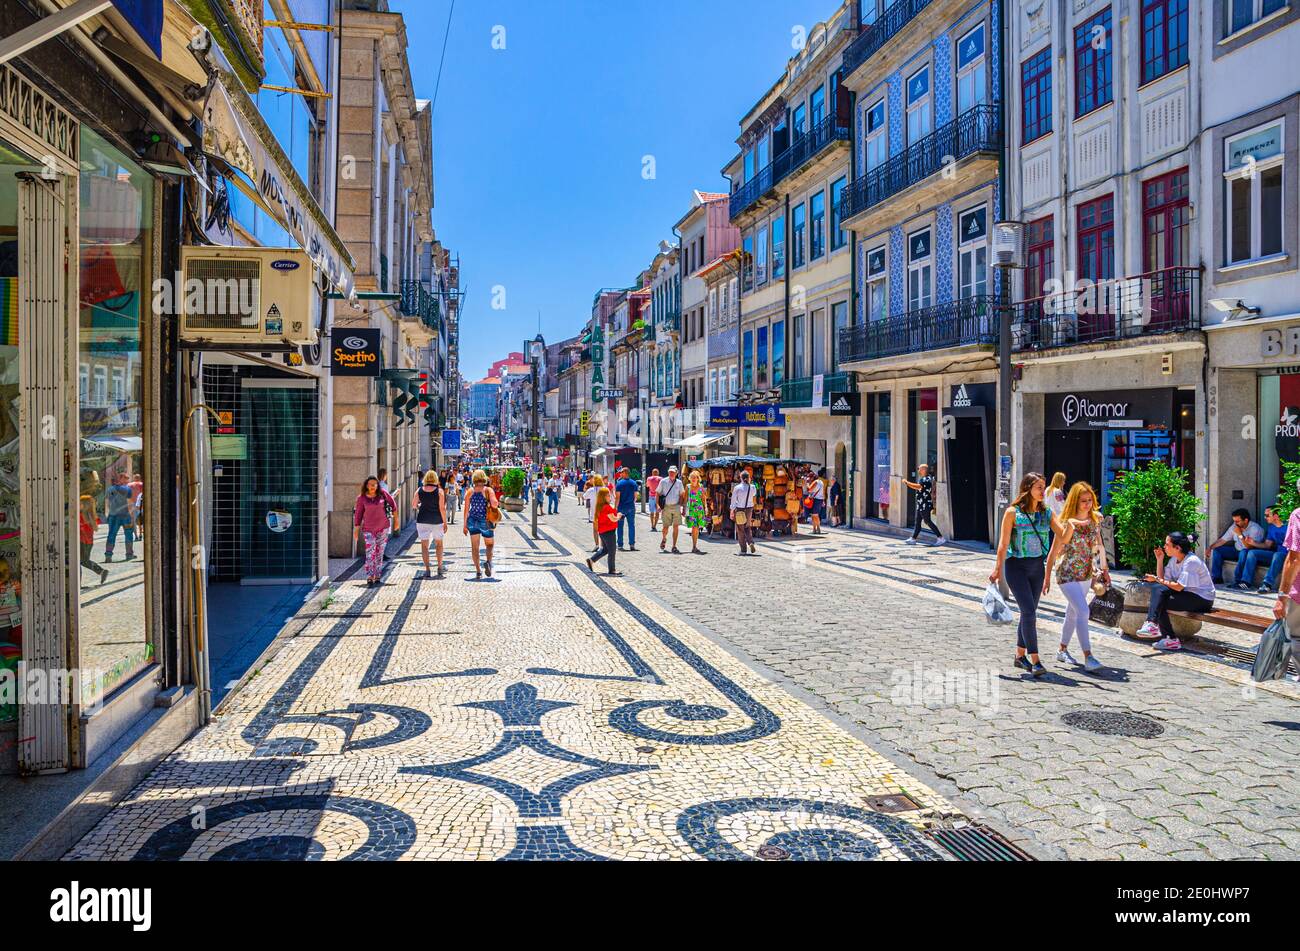 Porto, Portugal, June 23, 2017: people tourists walking down Rua de Santa Catarina cobblestone pedestrian street with colorful buildings and houses in historical city centre in sunny summer day Stock Photo